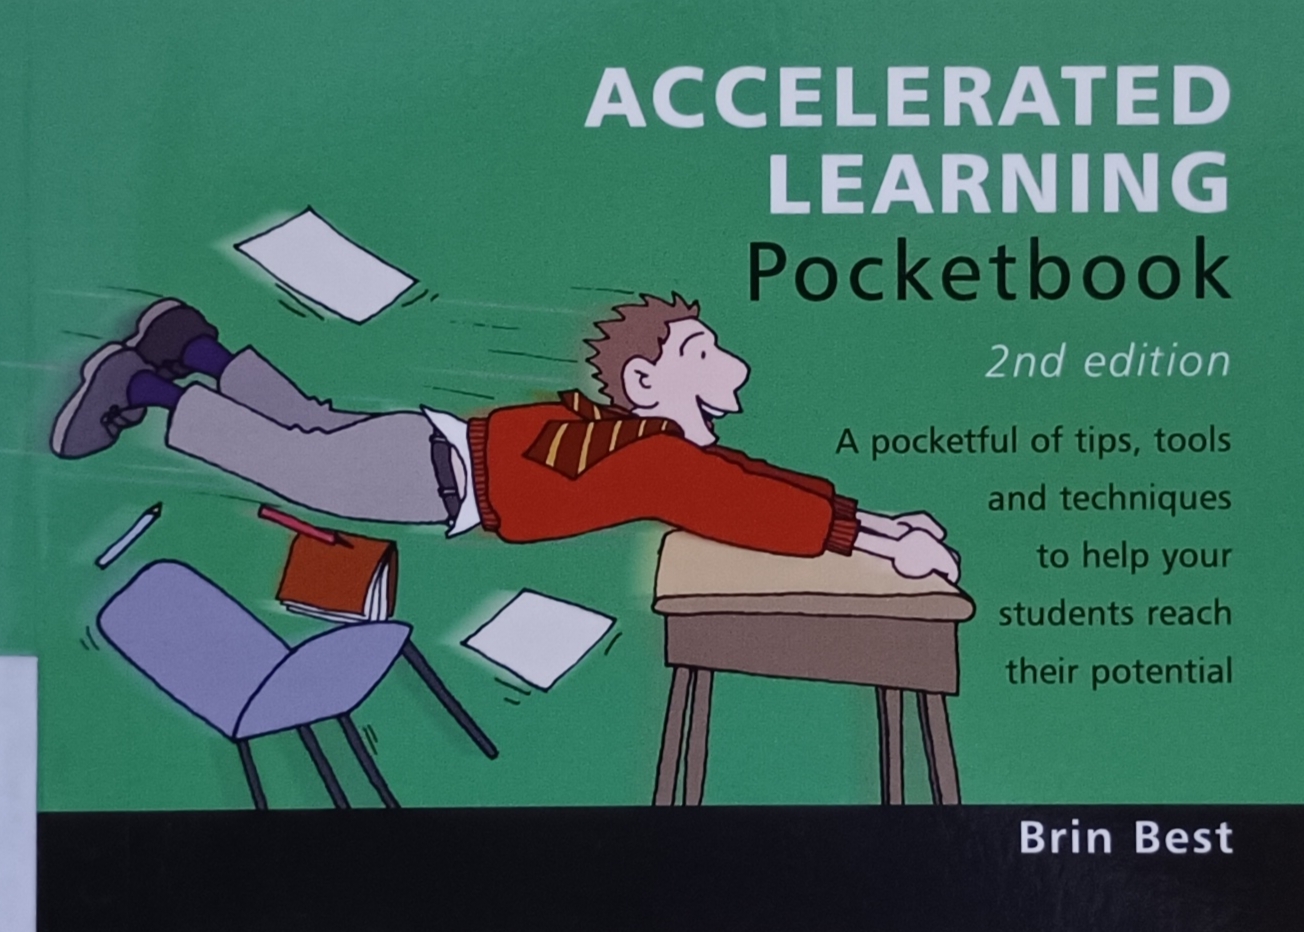 Cover image for The accelerated learning pocketbook bibliographic